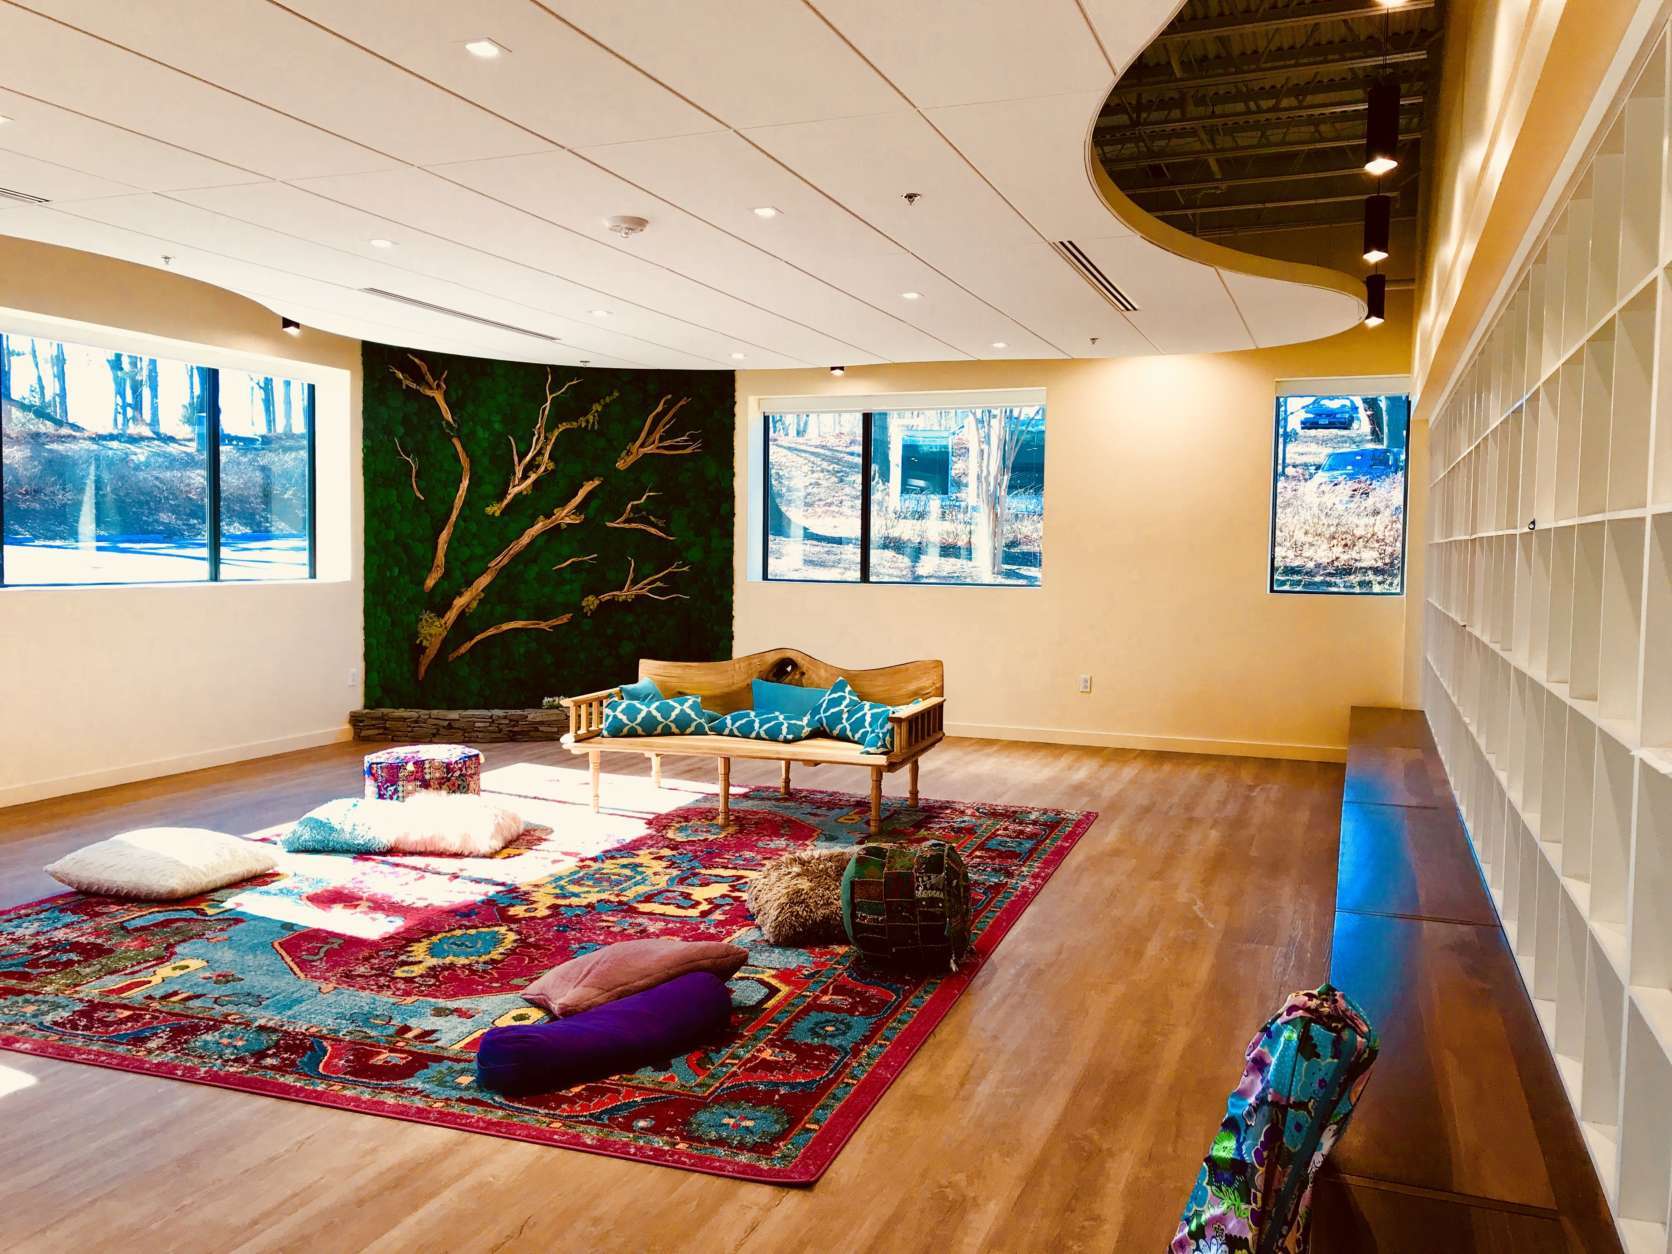 Beloved Yoga opened the largest yoga studio in the DC area in February. (Courtesy Beloved Yoga)